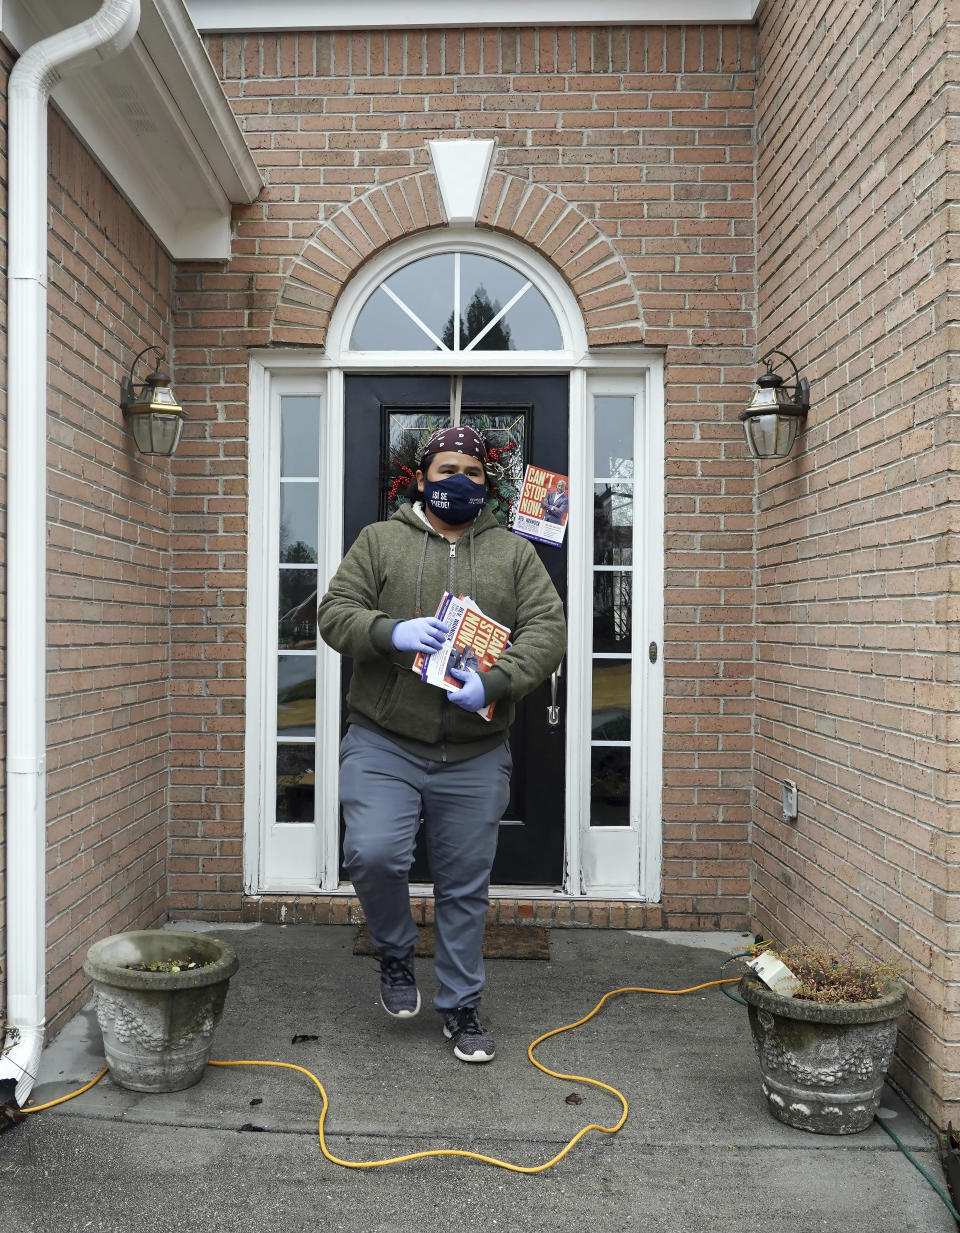 Graco Hernandez Valenzuela heads away after leaving a leaflet while canvassing a neighborhood for the Working Families Party regarding the U.S. Senate races, Wednesday, Dec. 16, 2020, in Lawrenceville, Ga. (AP Photo/Tami Chappell)